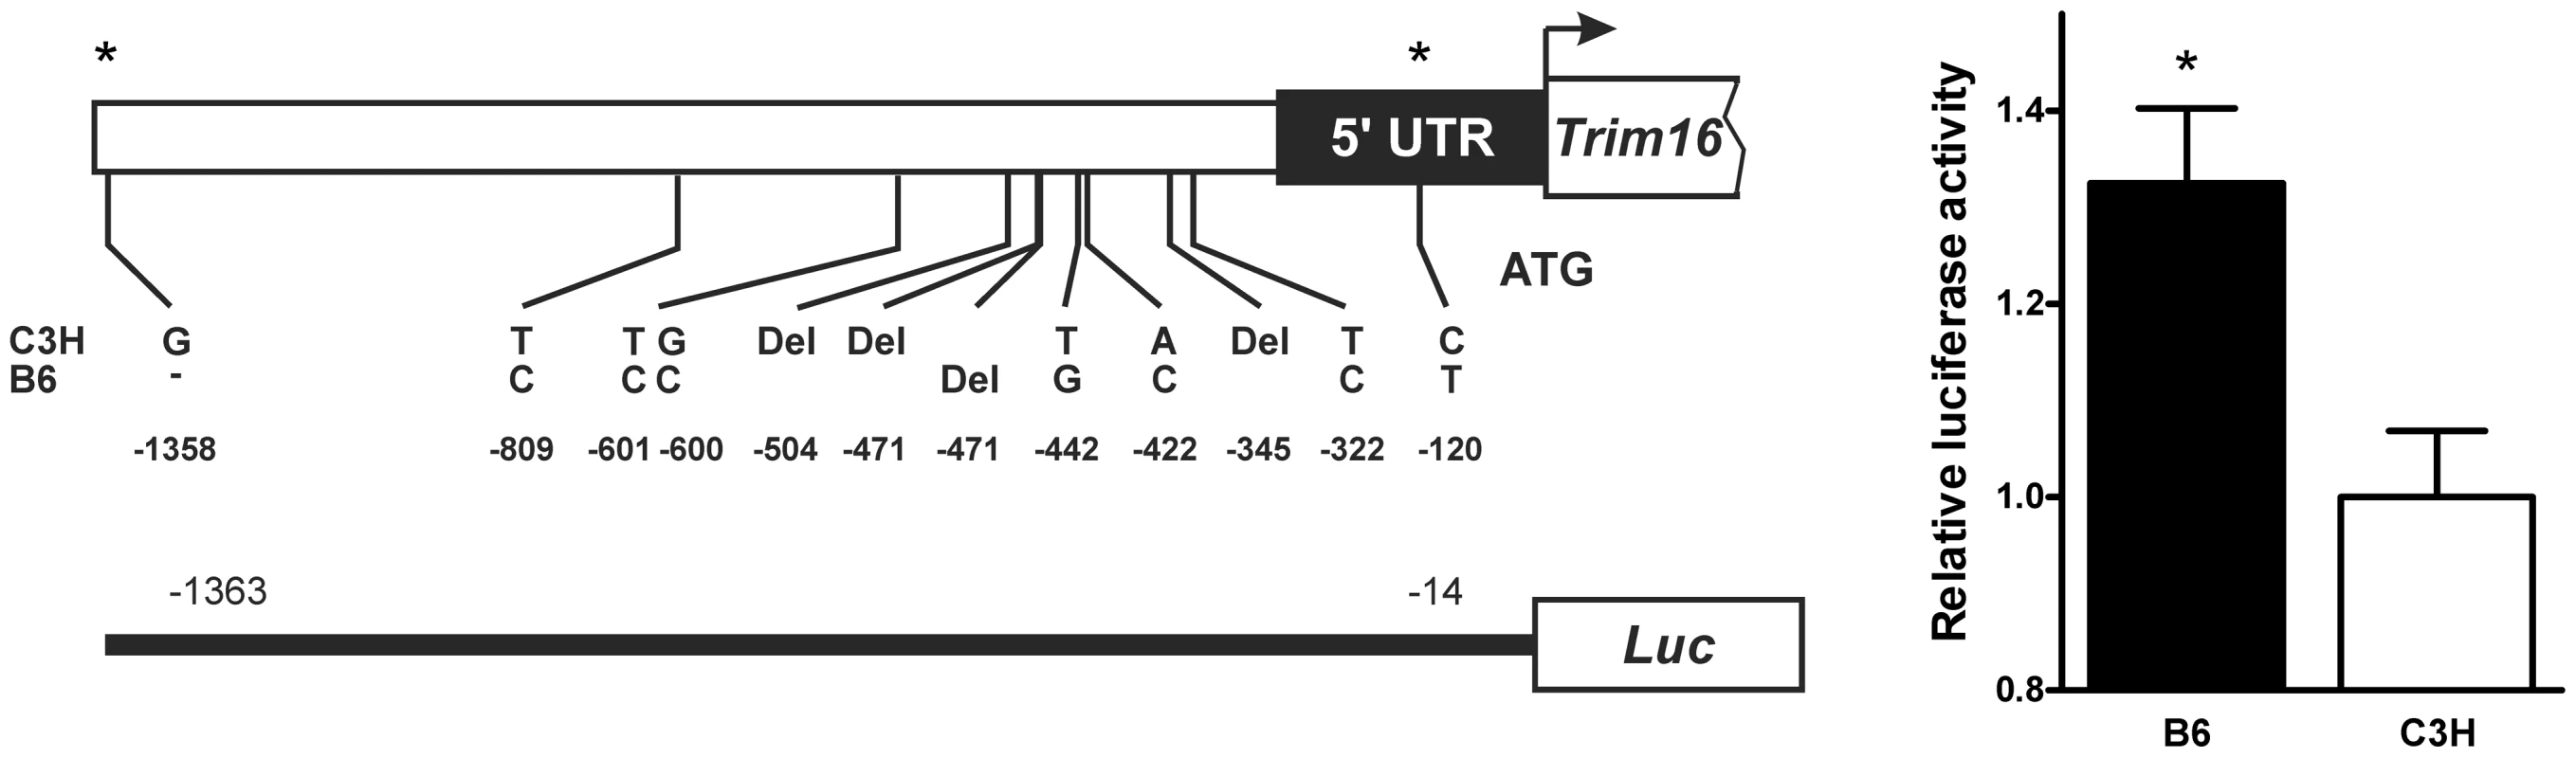 B6 and C3H <i>Trim16</i> promoter sequence variation alters transcription.